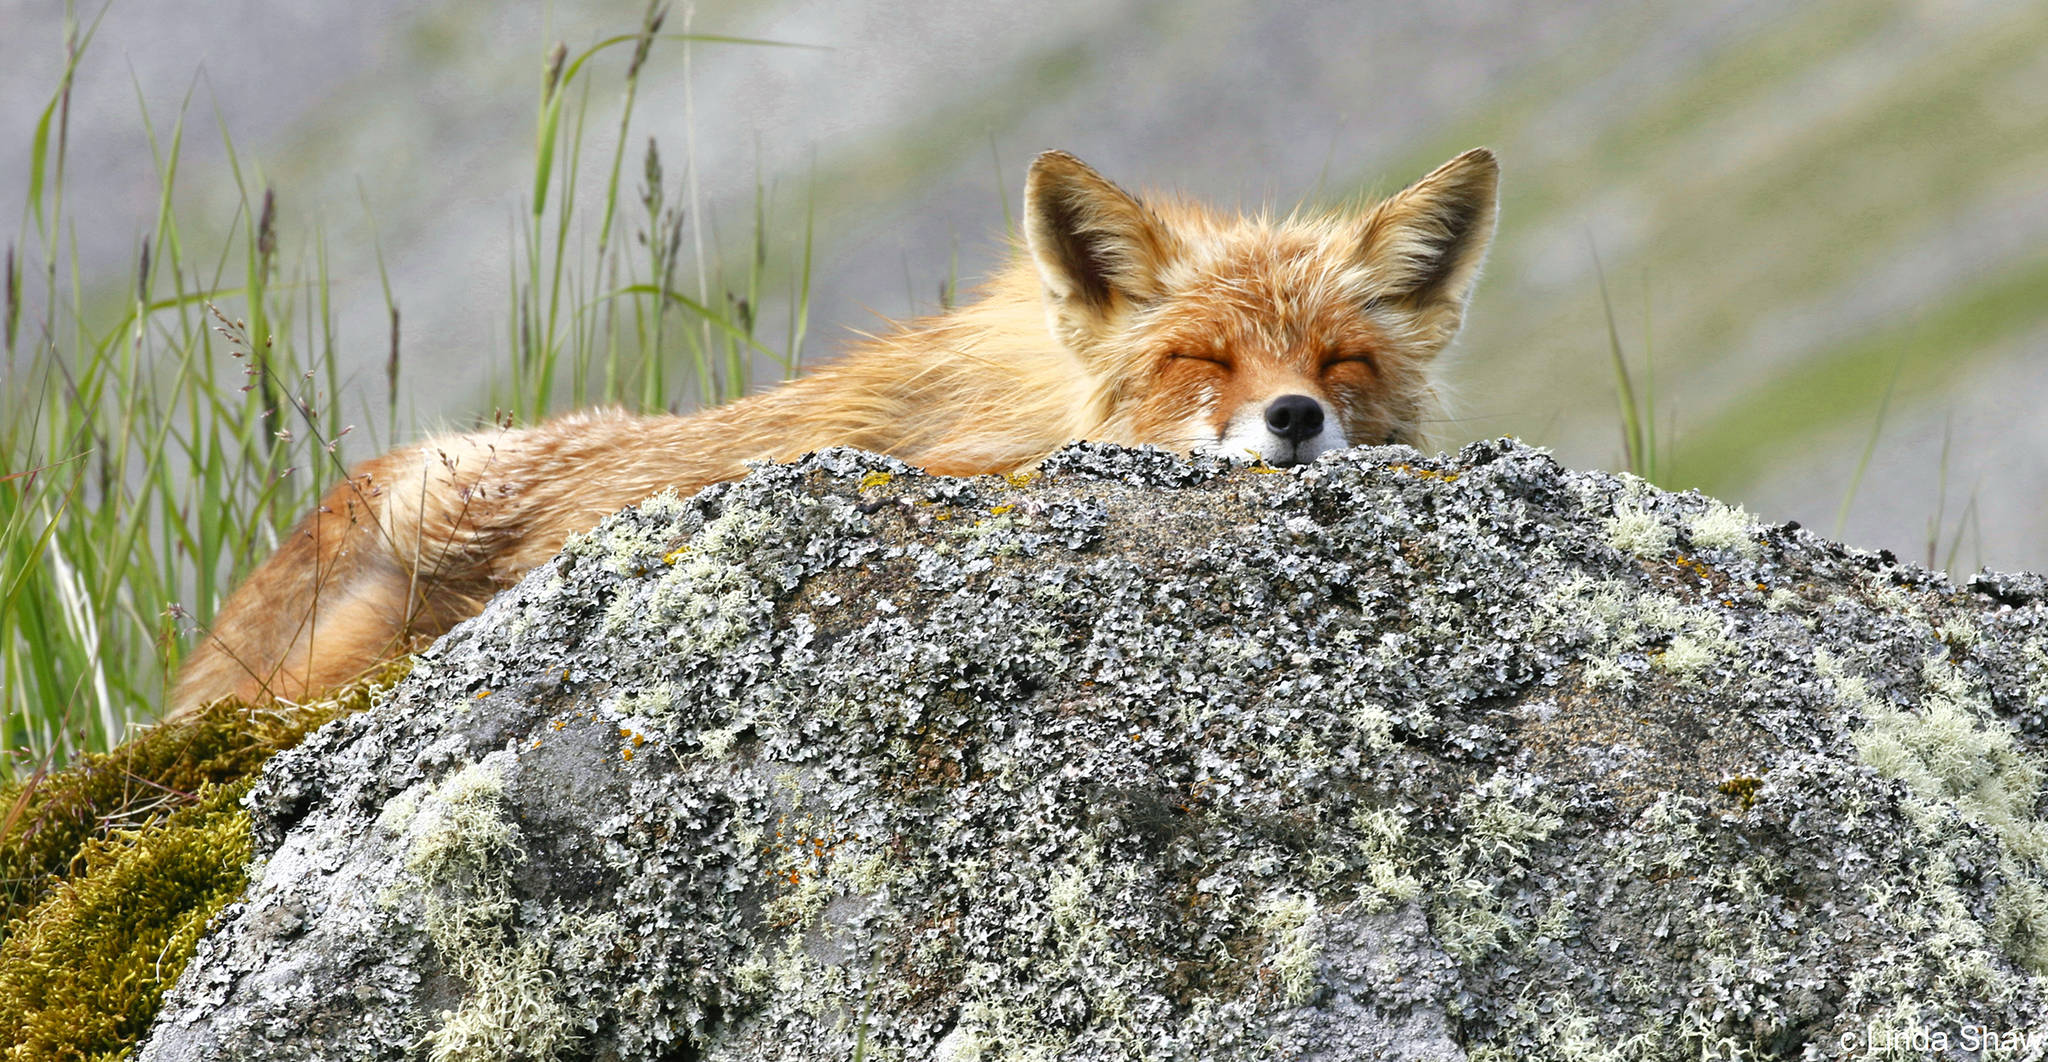 A red fox gets in some last minutes of sleep during the early morning hours on Round Island in Bristol Bay on June 28, 2019. (Courtesy Photo | Linda Shaw)